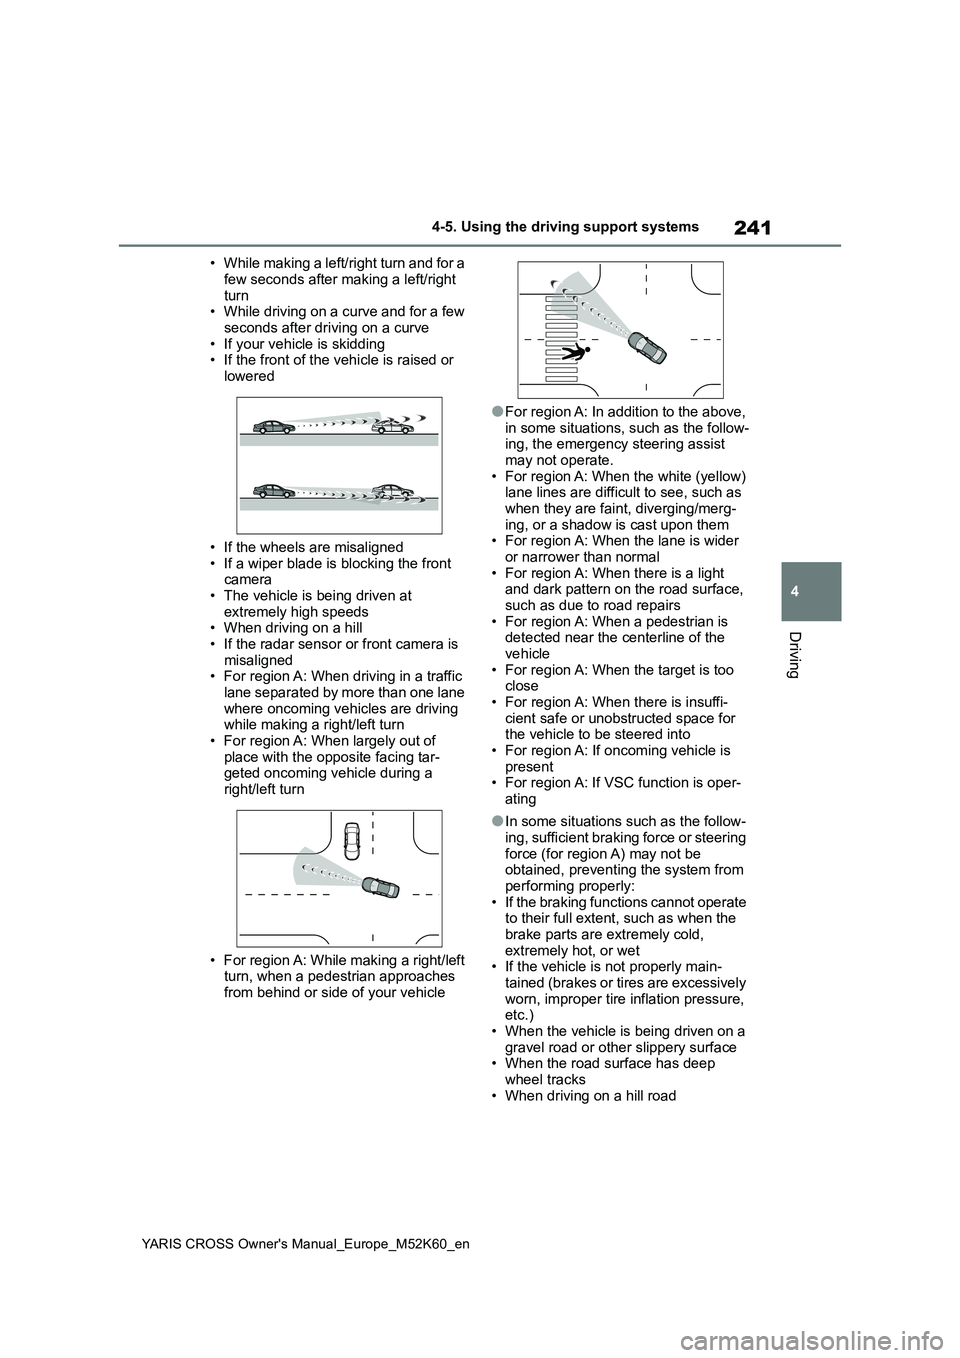 TOYOTA YARIS CROSS 2021  Owners Manual 241
4
YARIS CROSS Owner's Manual_Europe_M52K60_en
4-5. Using the driving support systems
Driving
• While making a left/right turn and for a  
few seconds after making a left/right  turn• While